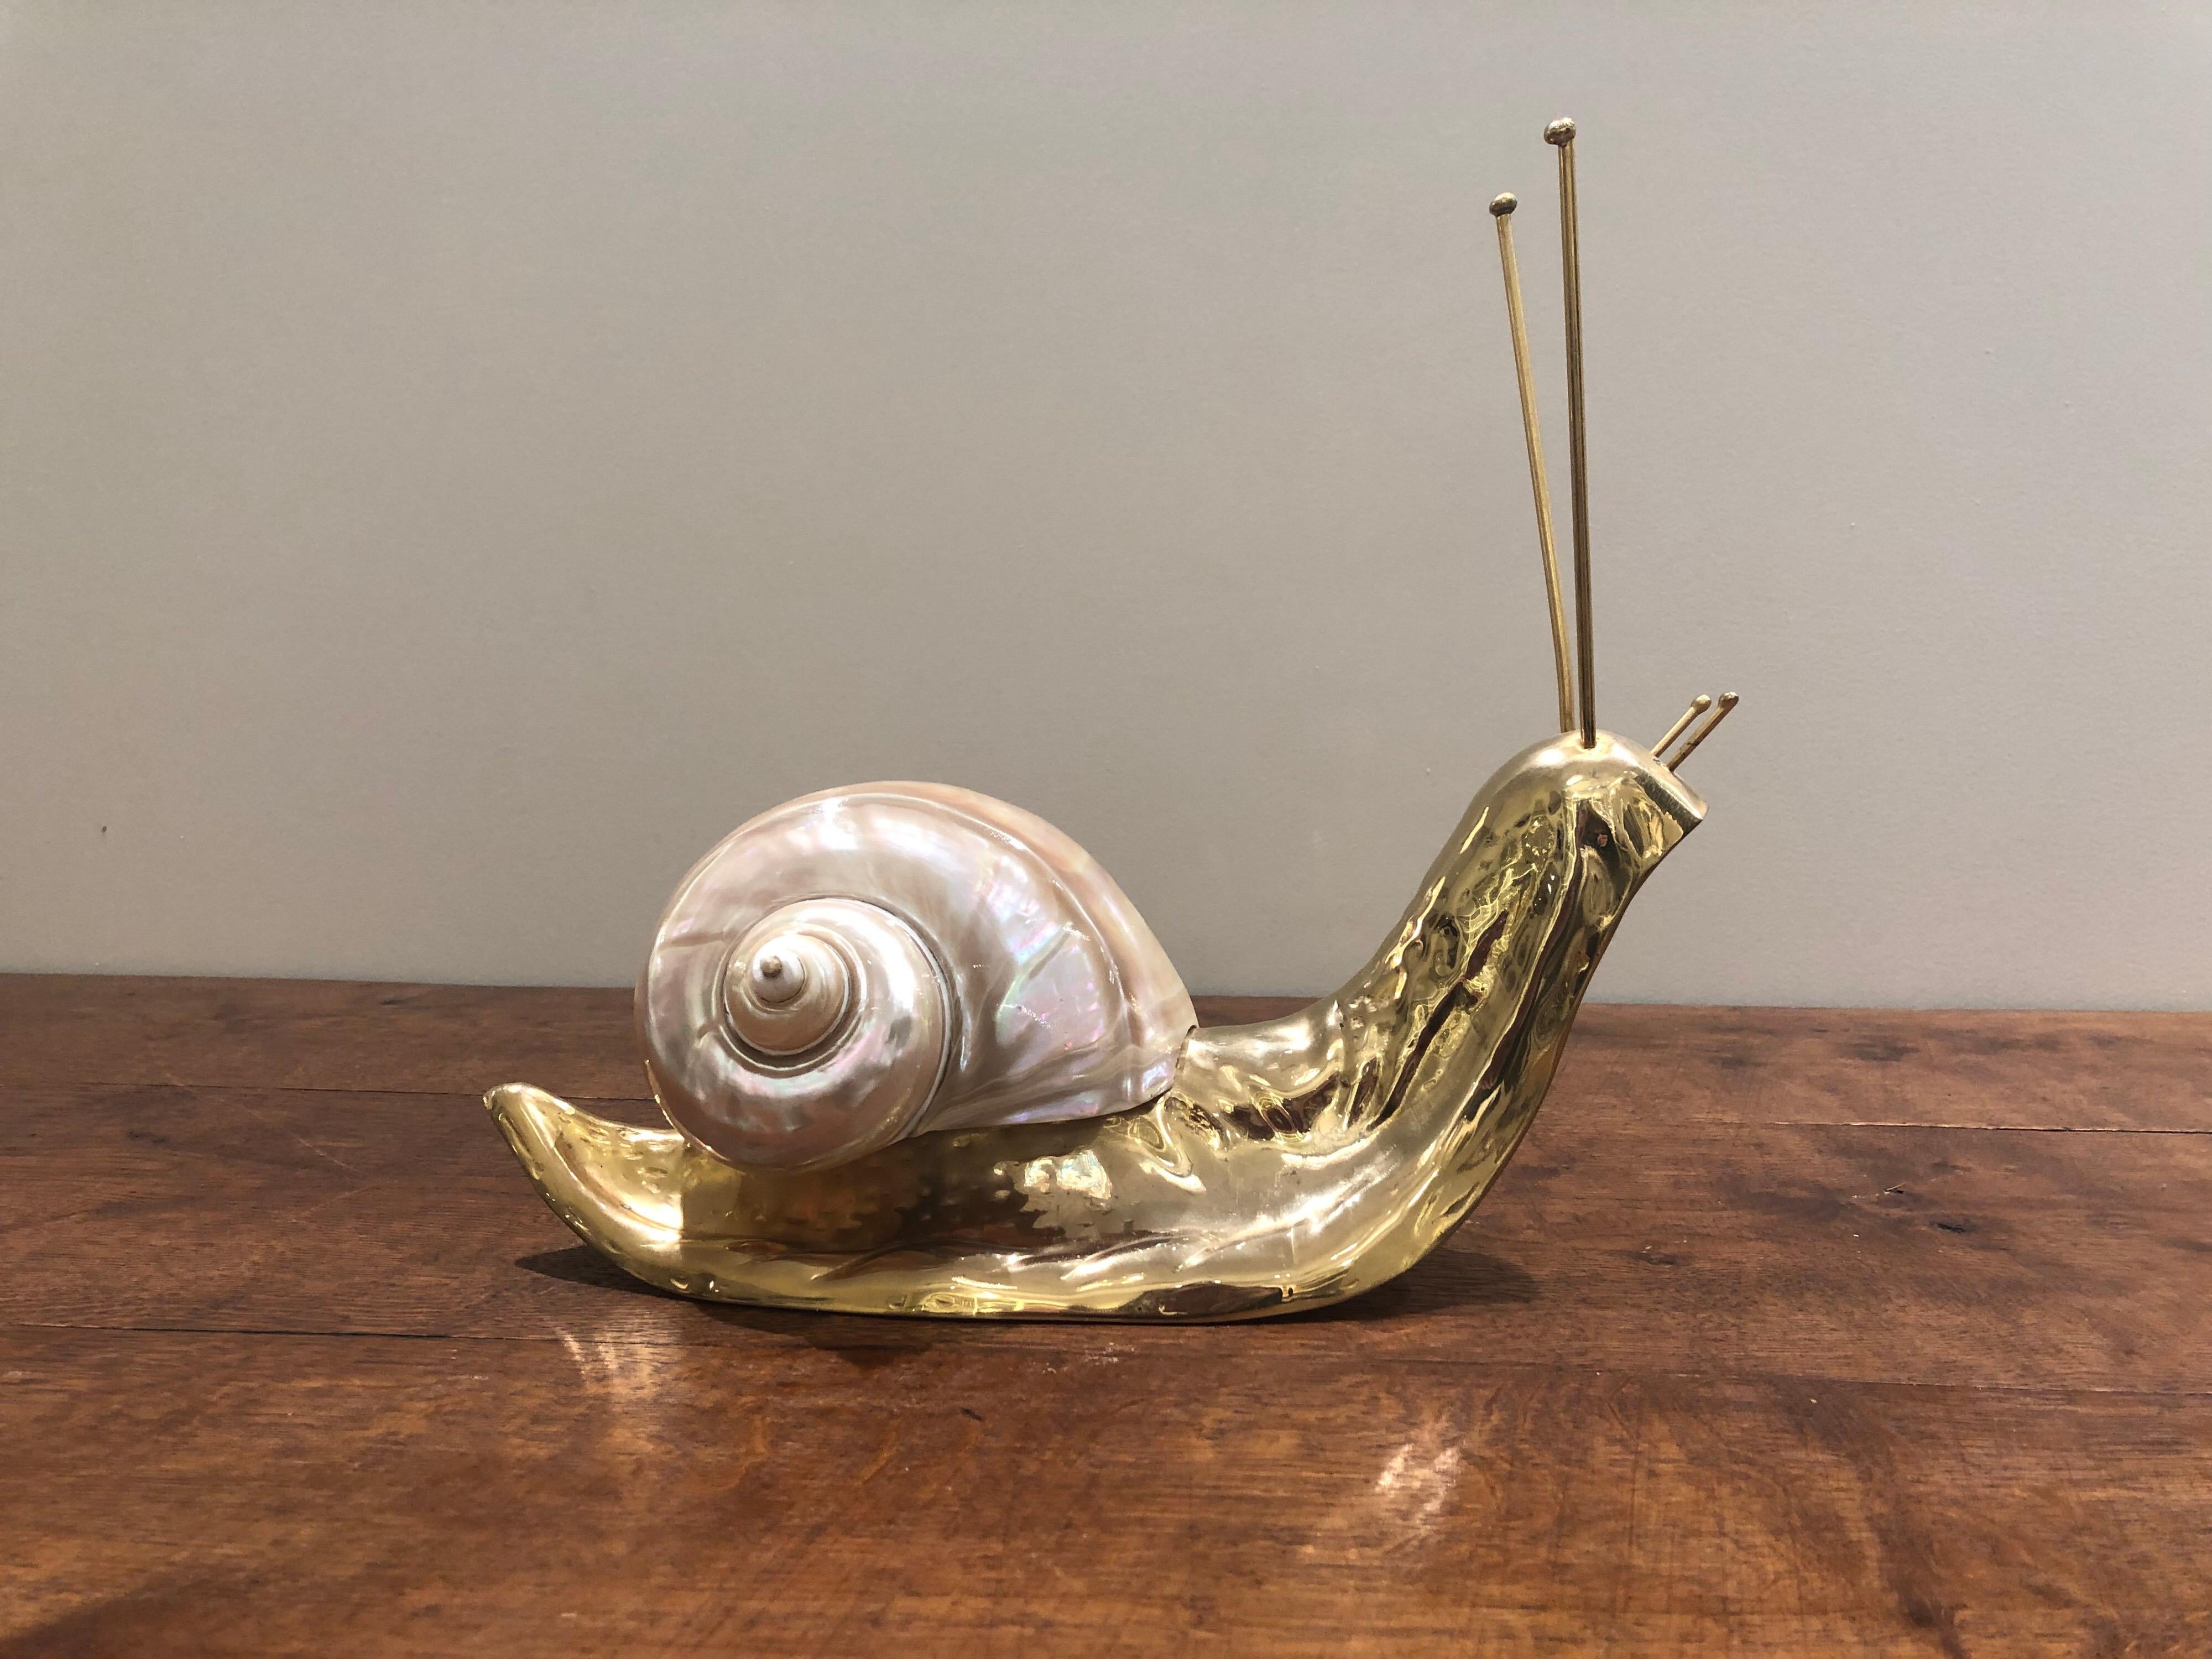 A charming decorative Italian nautical midcentury 1970s brass sculpture of an escargot with a conch shell on its back. The snail is beautifully detailed with a curved body and antennae.